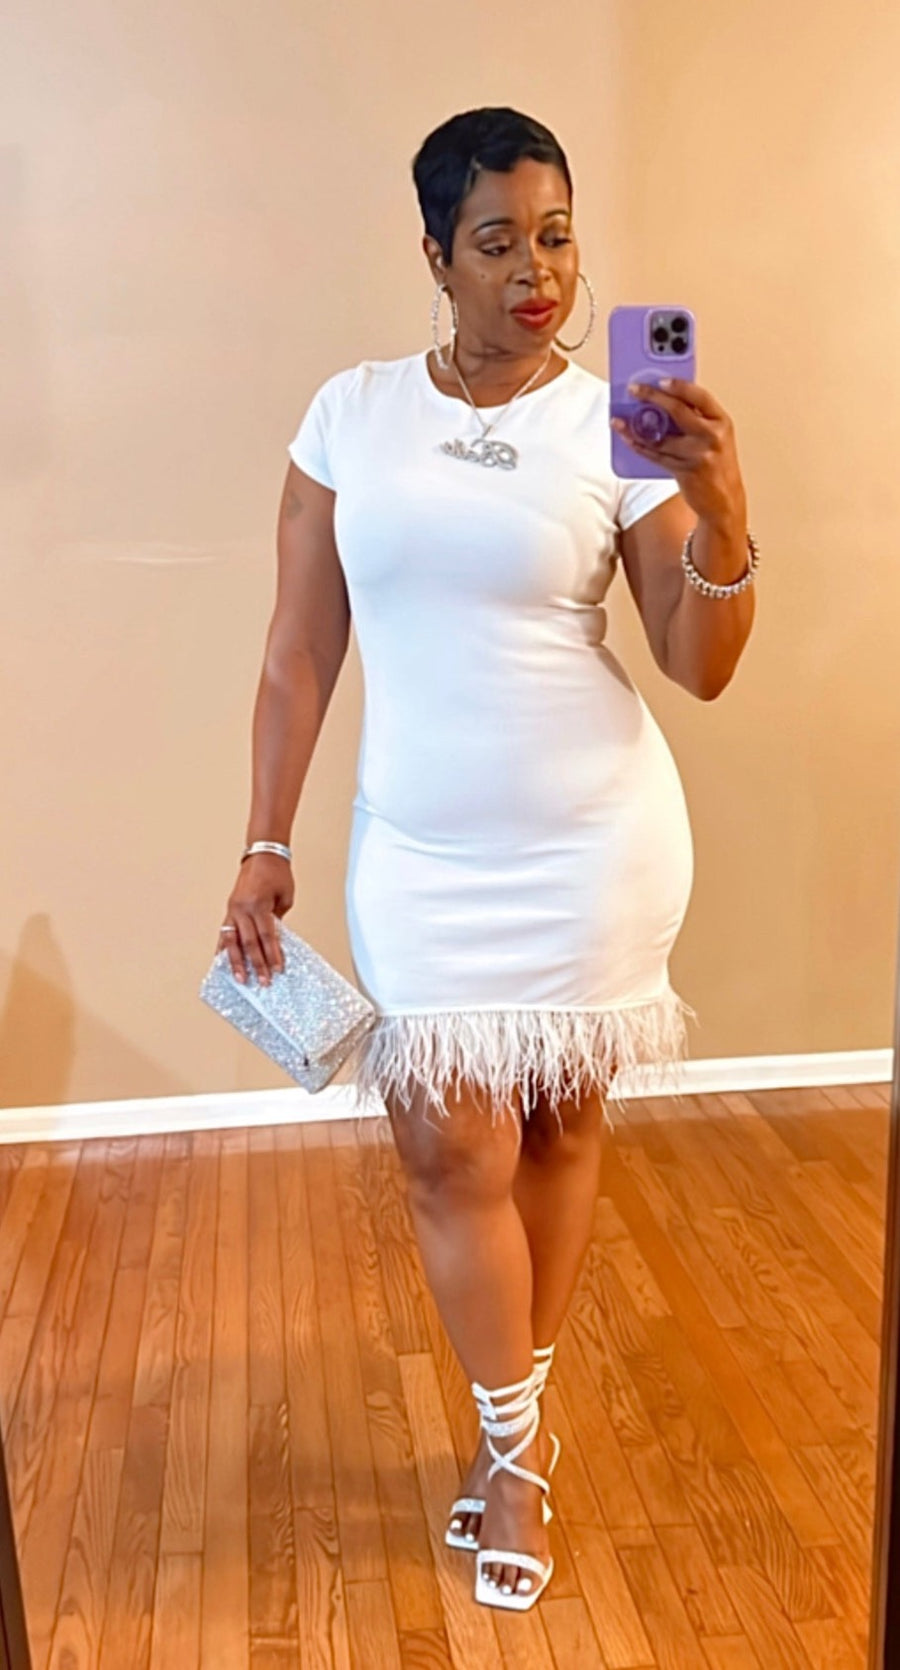 The “SHE’S A BEAUTY” Feather Dress (White)